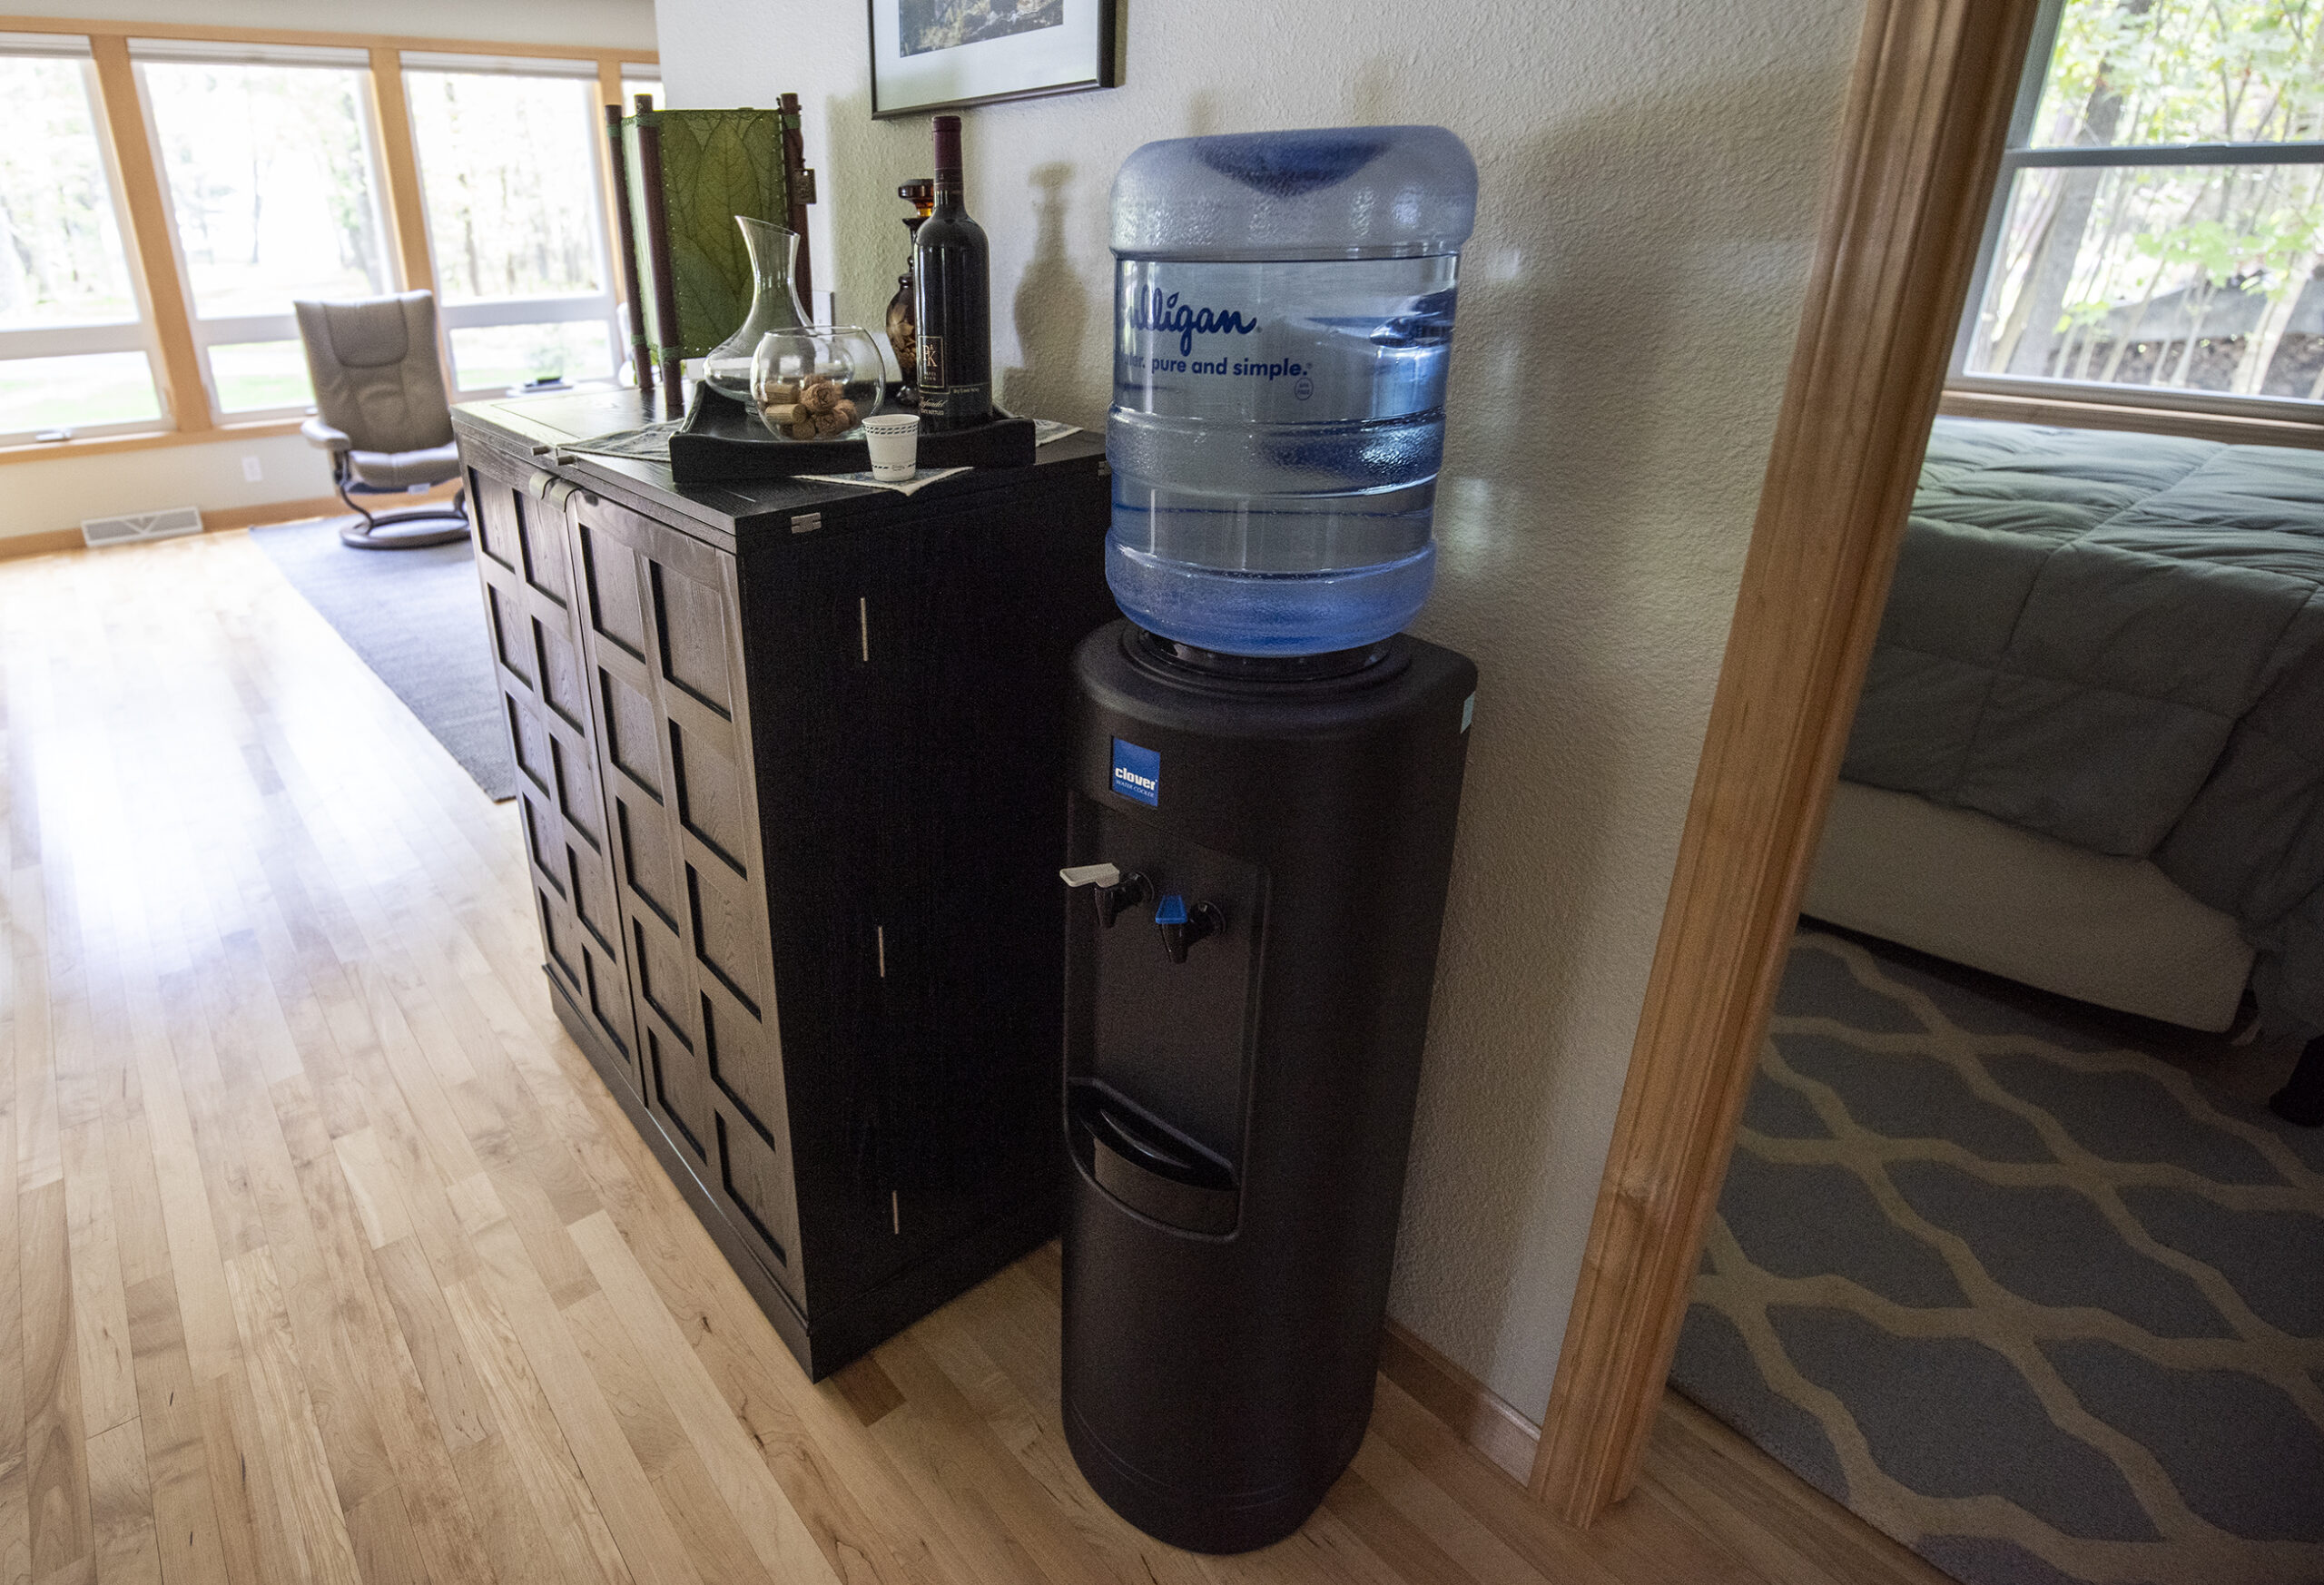 Wisconsin regulators provide bottled water to Stella residents affected by PFAS contamination